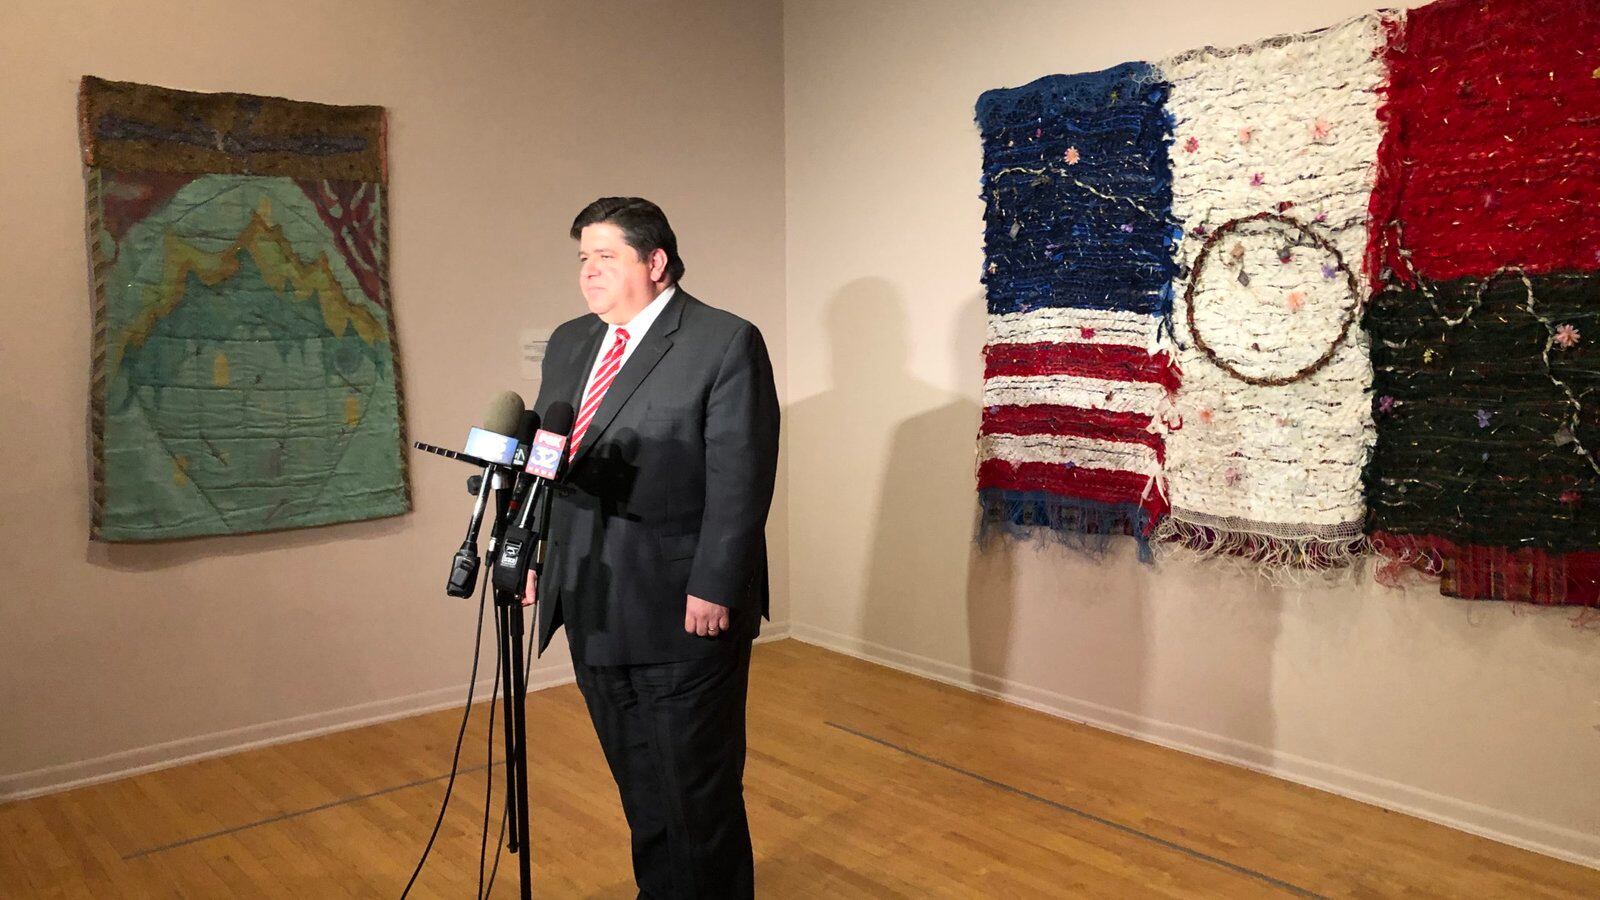 Gov. J.B. Pritzker announced the next phase of his early education agenda Jan. 21 at the National Museum of Mexican Art in Pilsen.